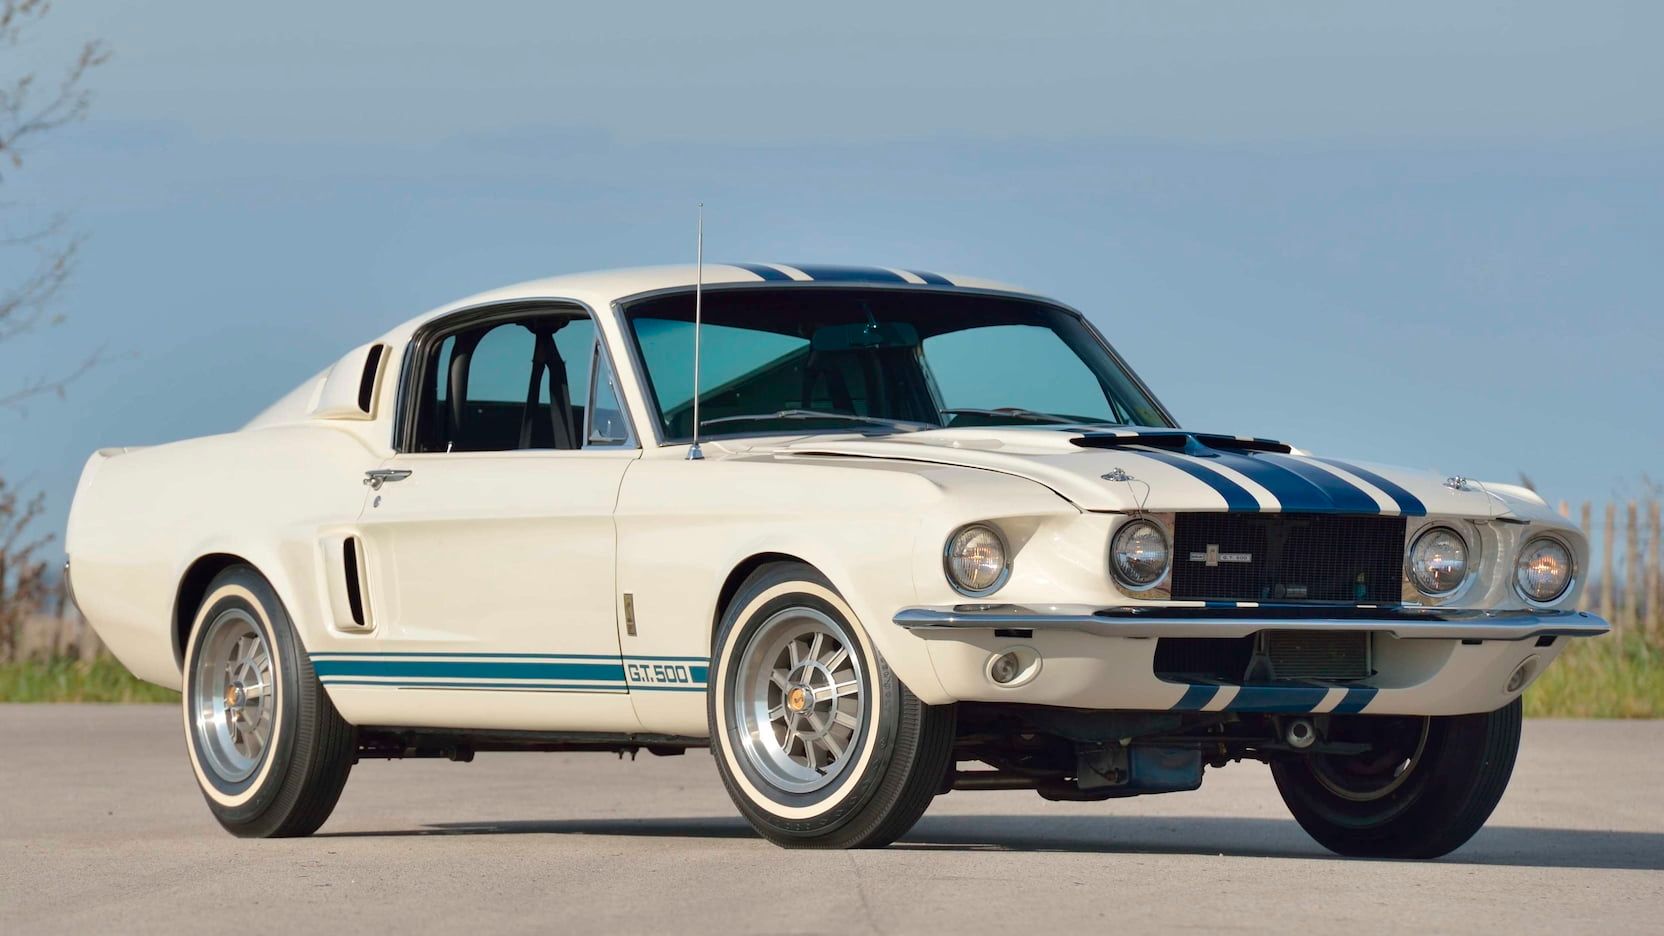 1967 Ford Mustang Shelby GT500 Super Snake front 3/4